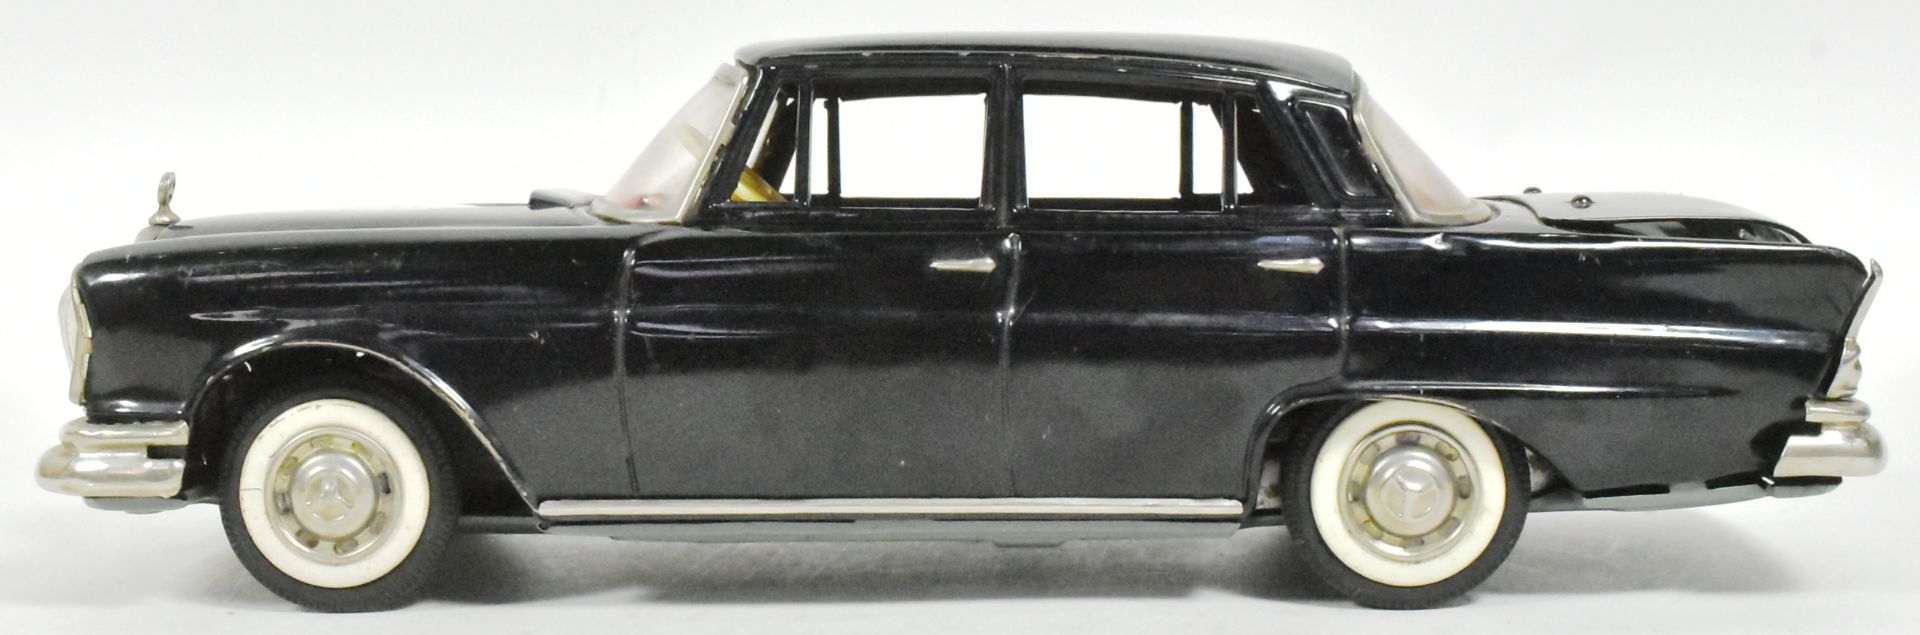 TINPLATE TOYS - JAPANESE TINPLATE MERCEDES BENZ 220S - Image 2 of 6